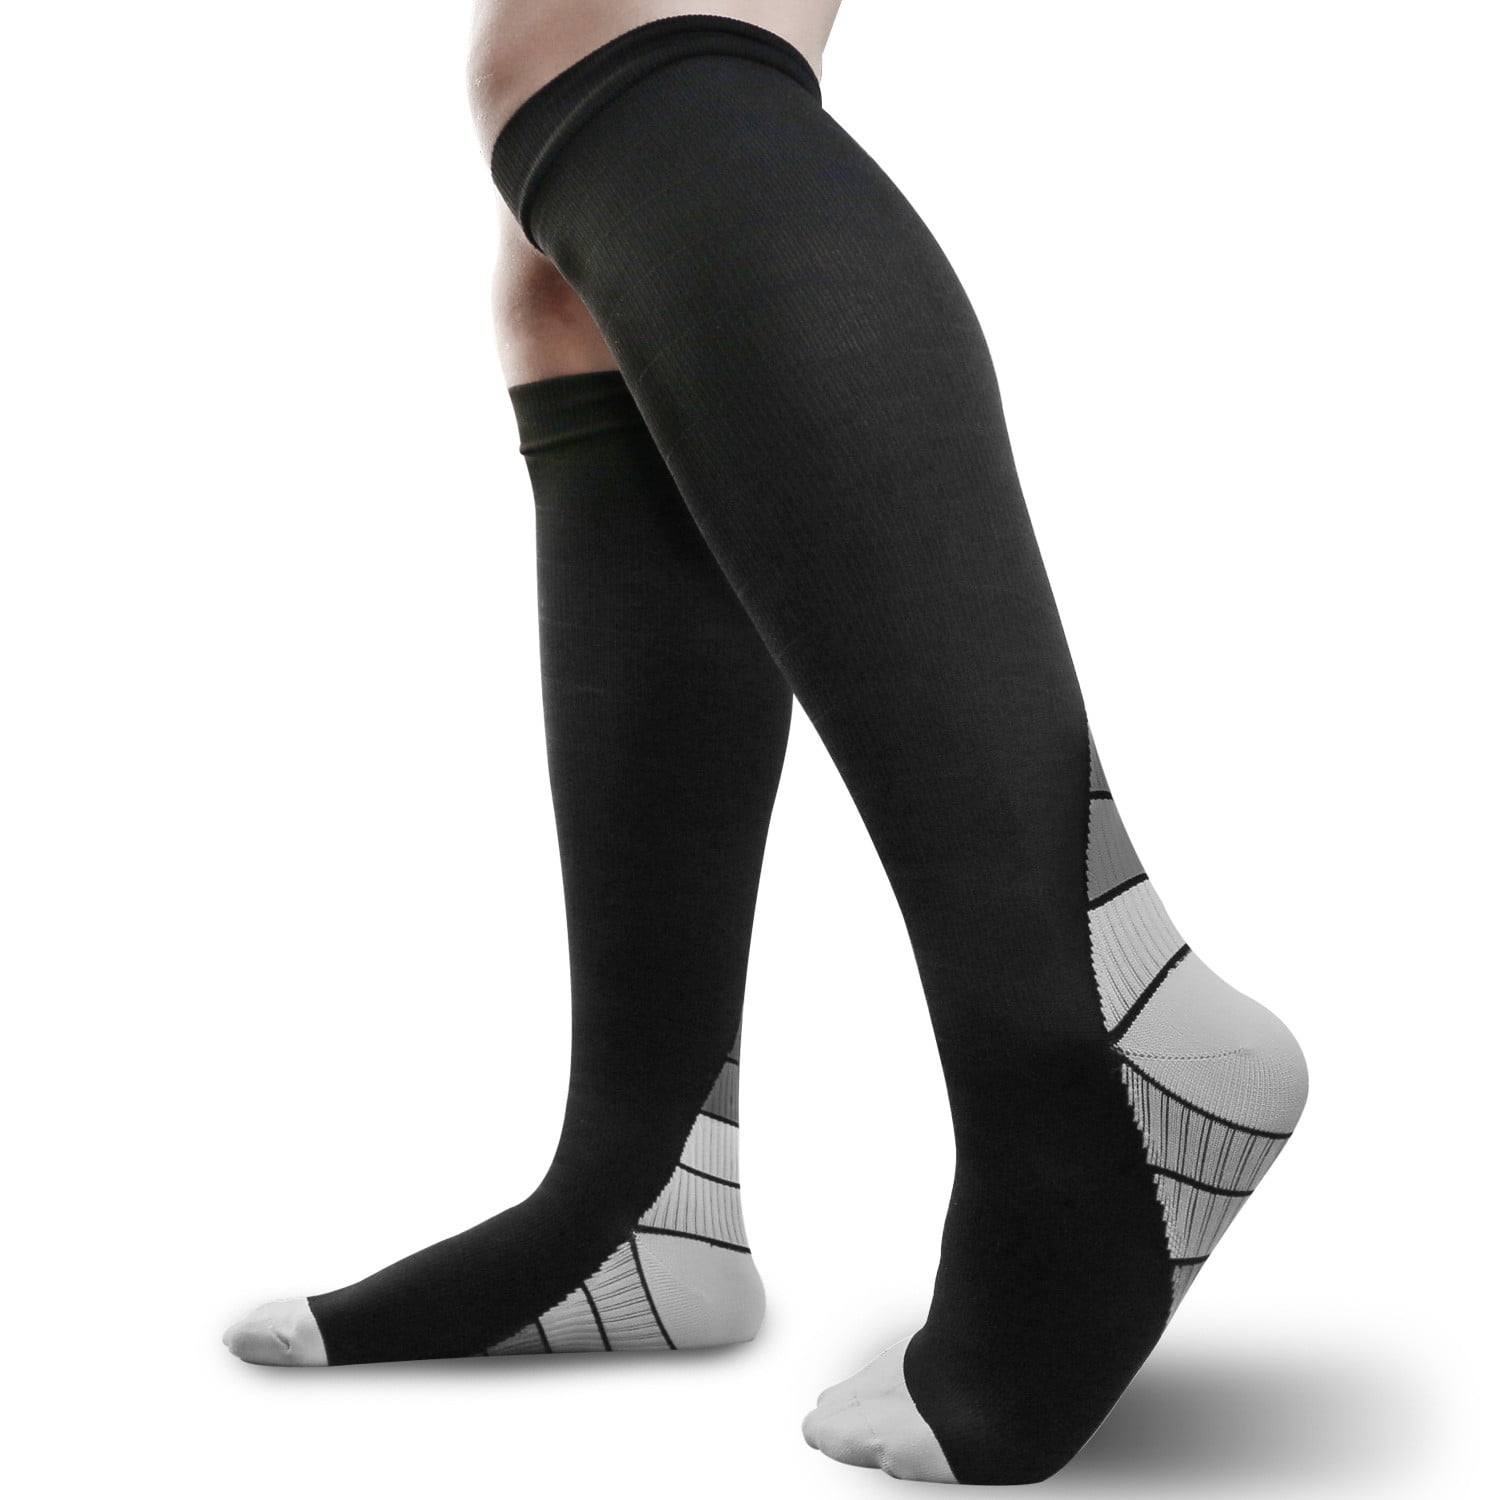 compression stockings for men